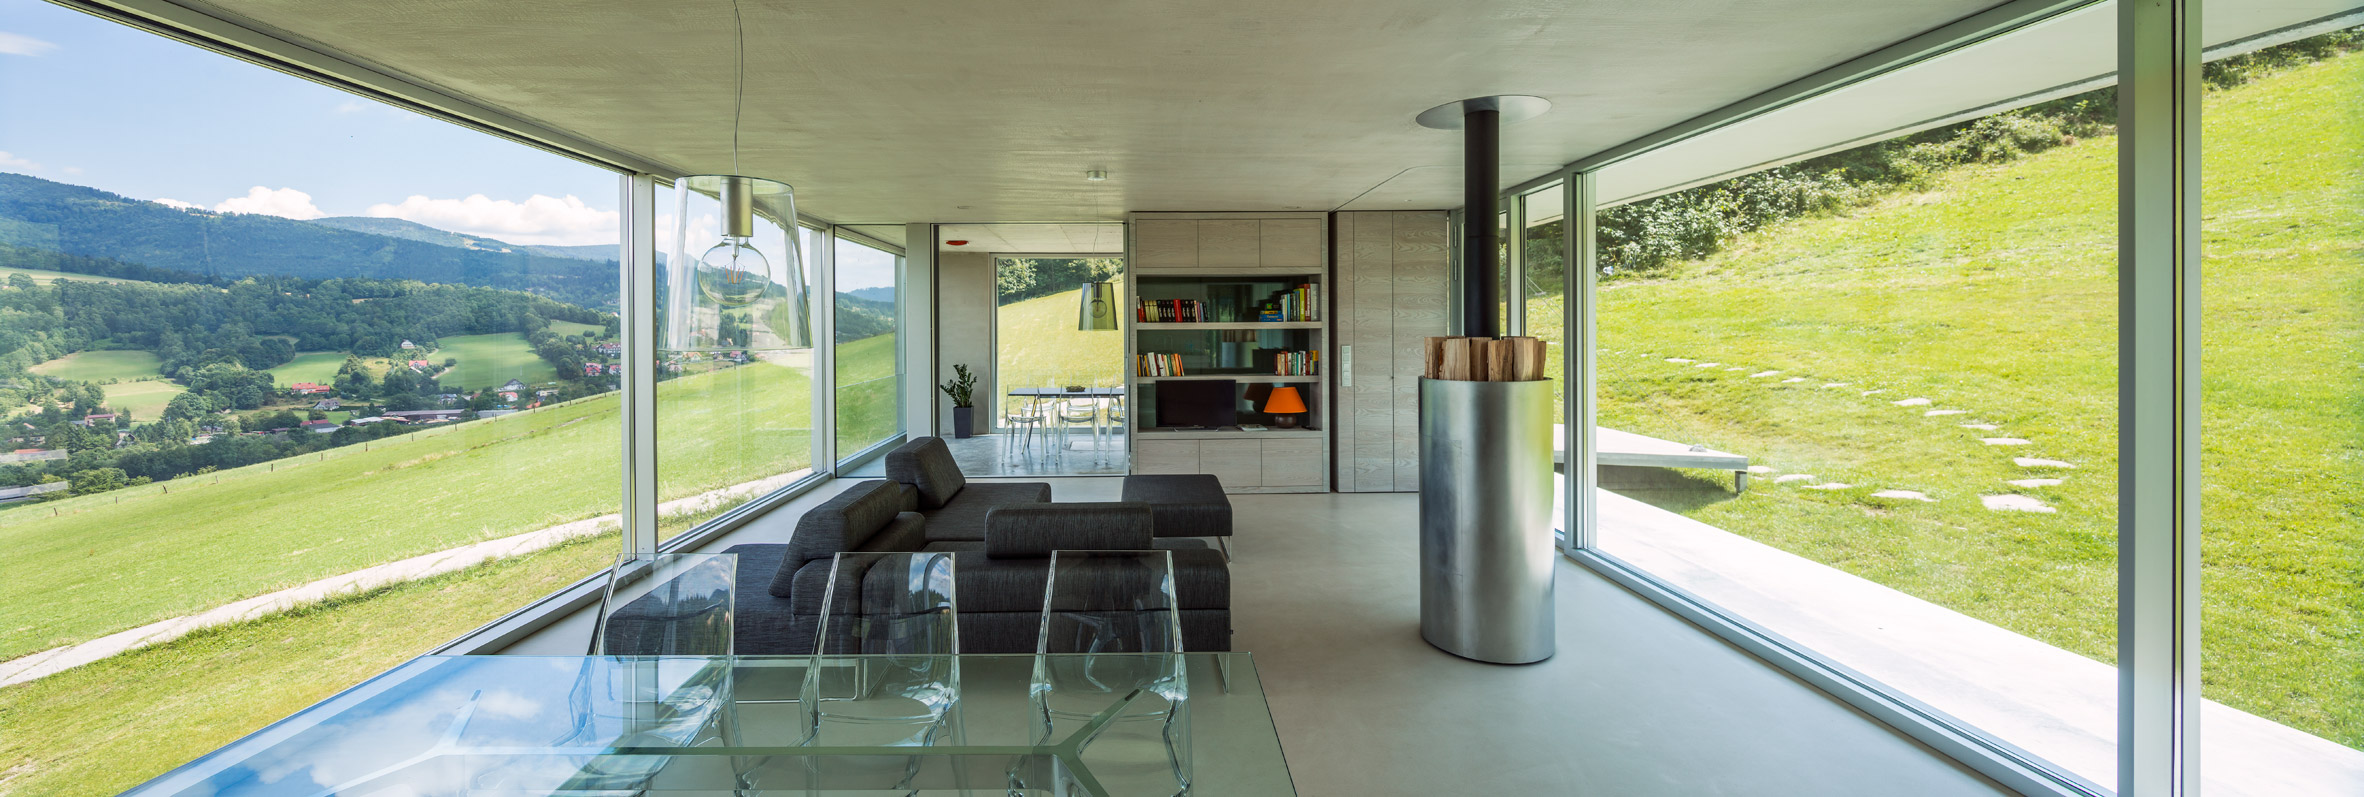 The inside of the home is open plan, with lots of modern materials used   metal, glass, acryl